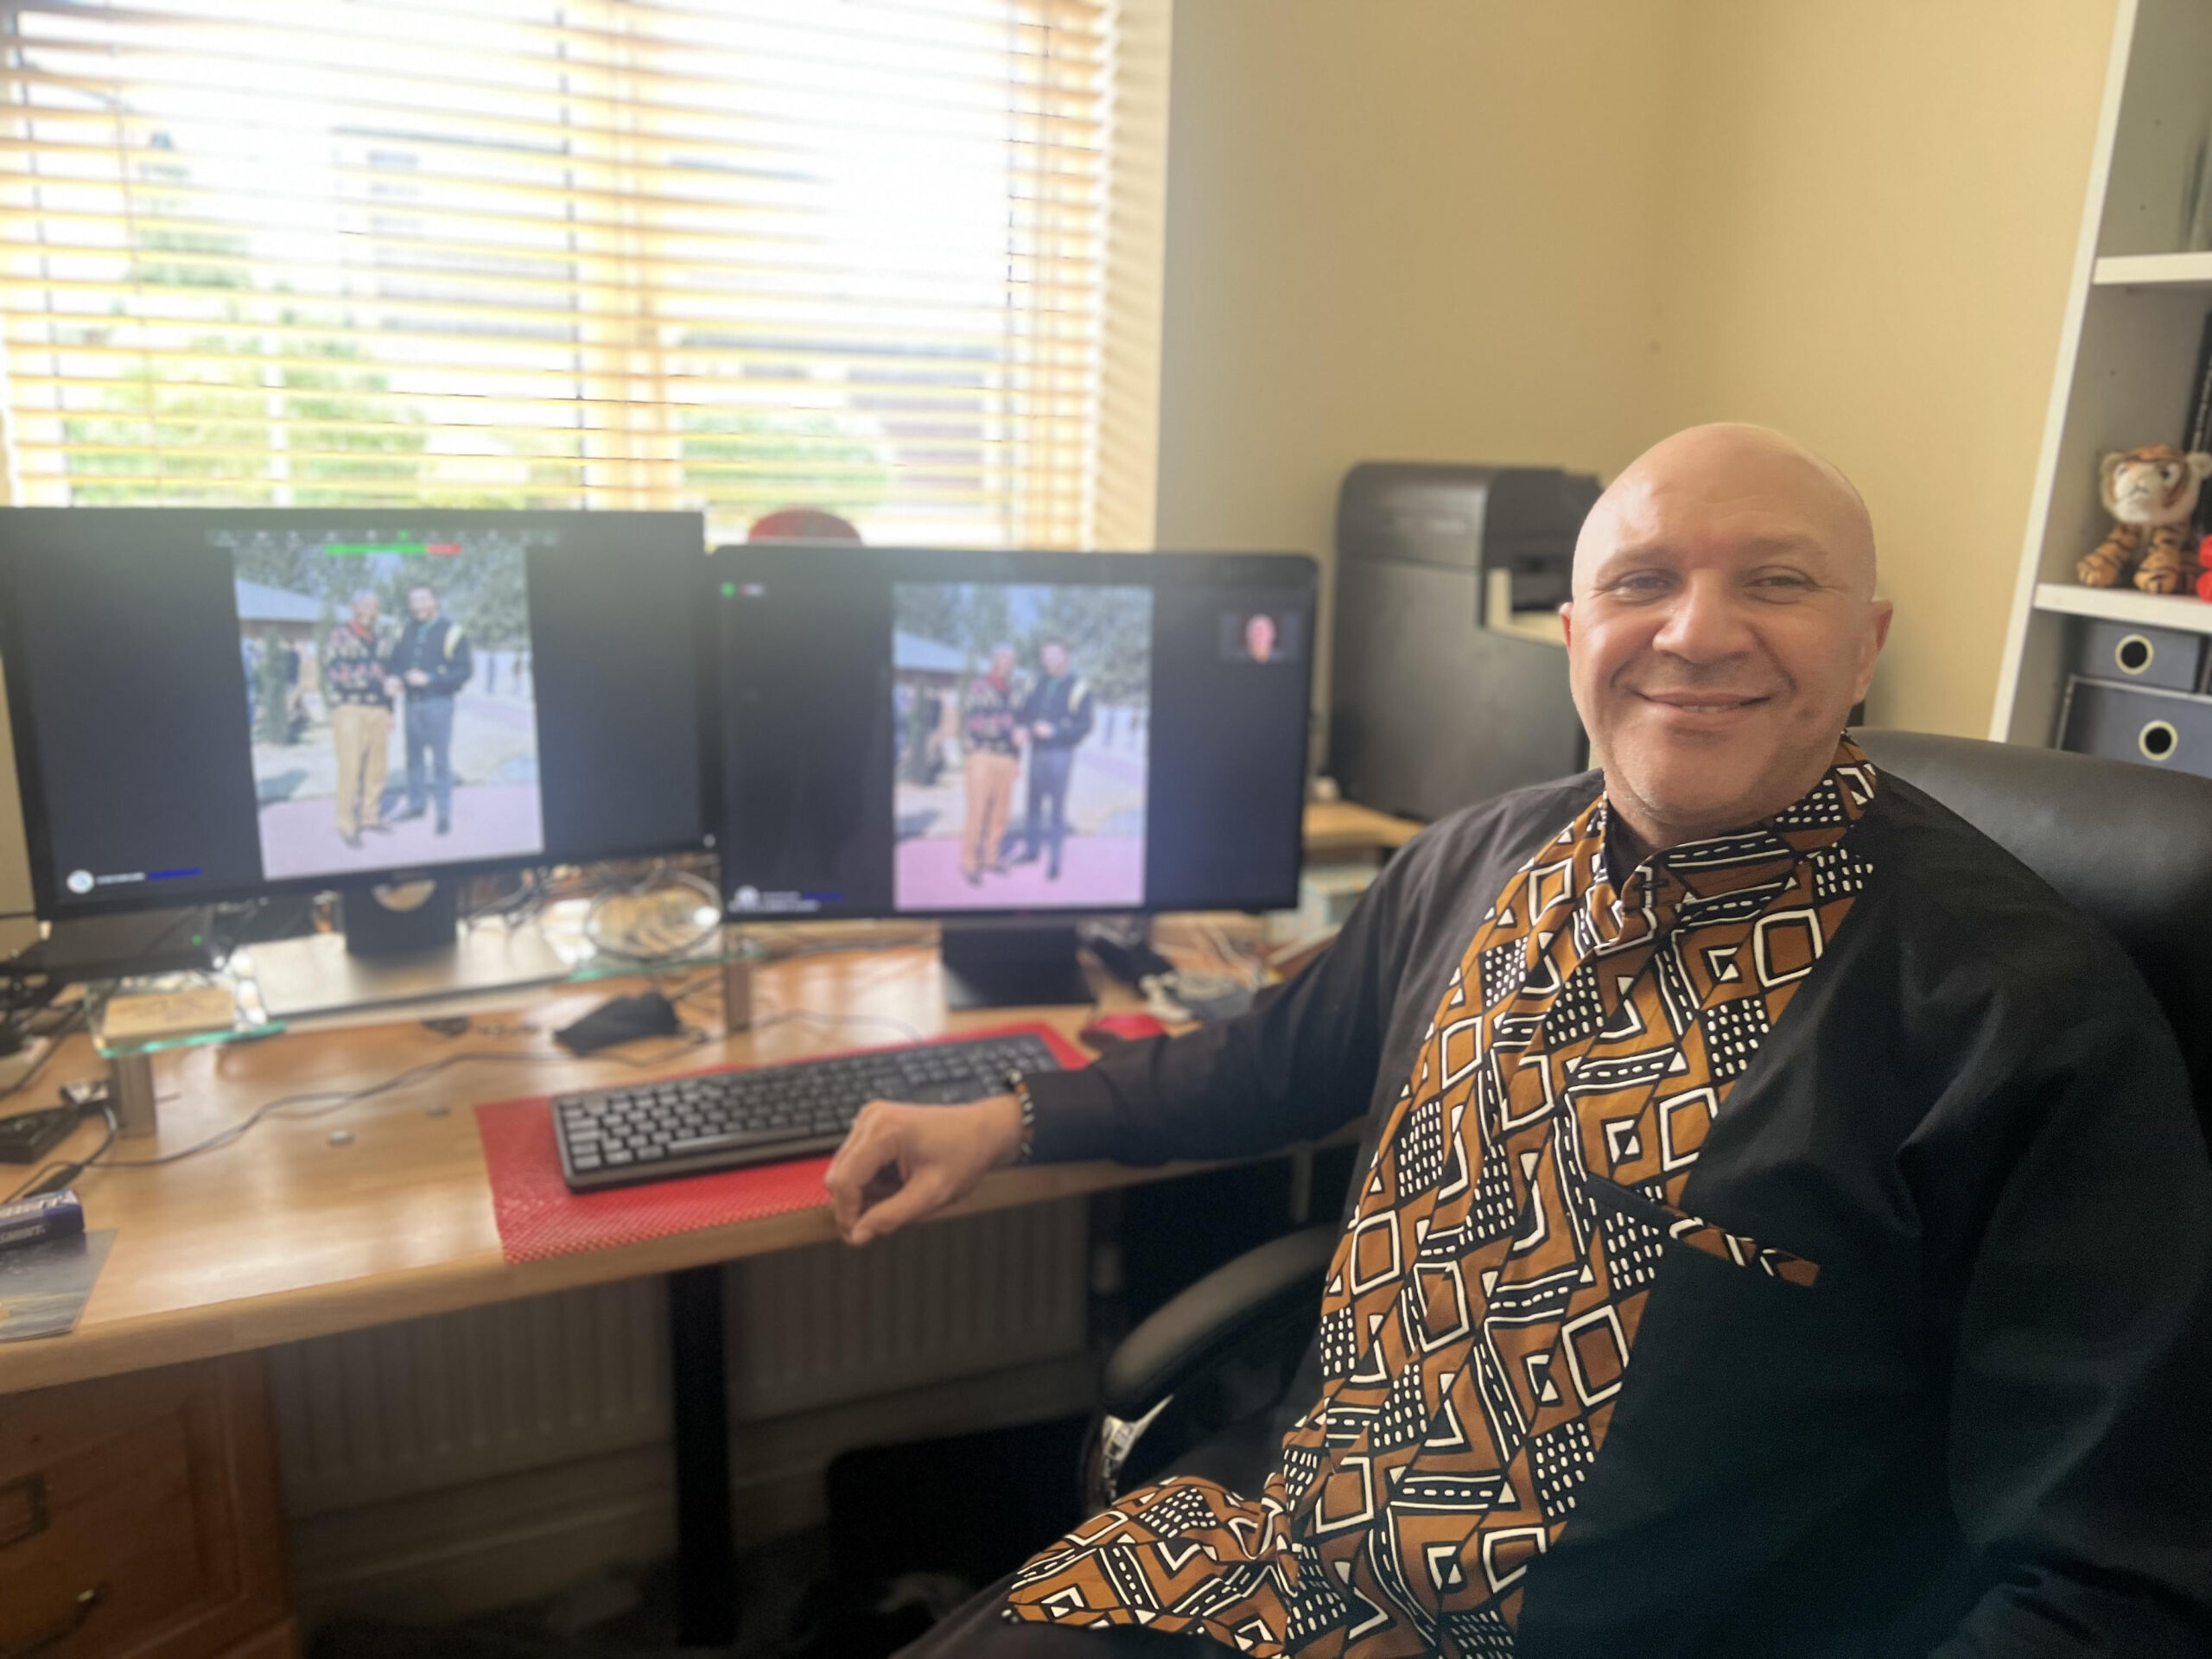 Nelson Mandela’s Former Bodyguard, Chris Lubbe, Uses DTEN to Level Up his Inspirational Talks From Home